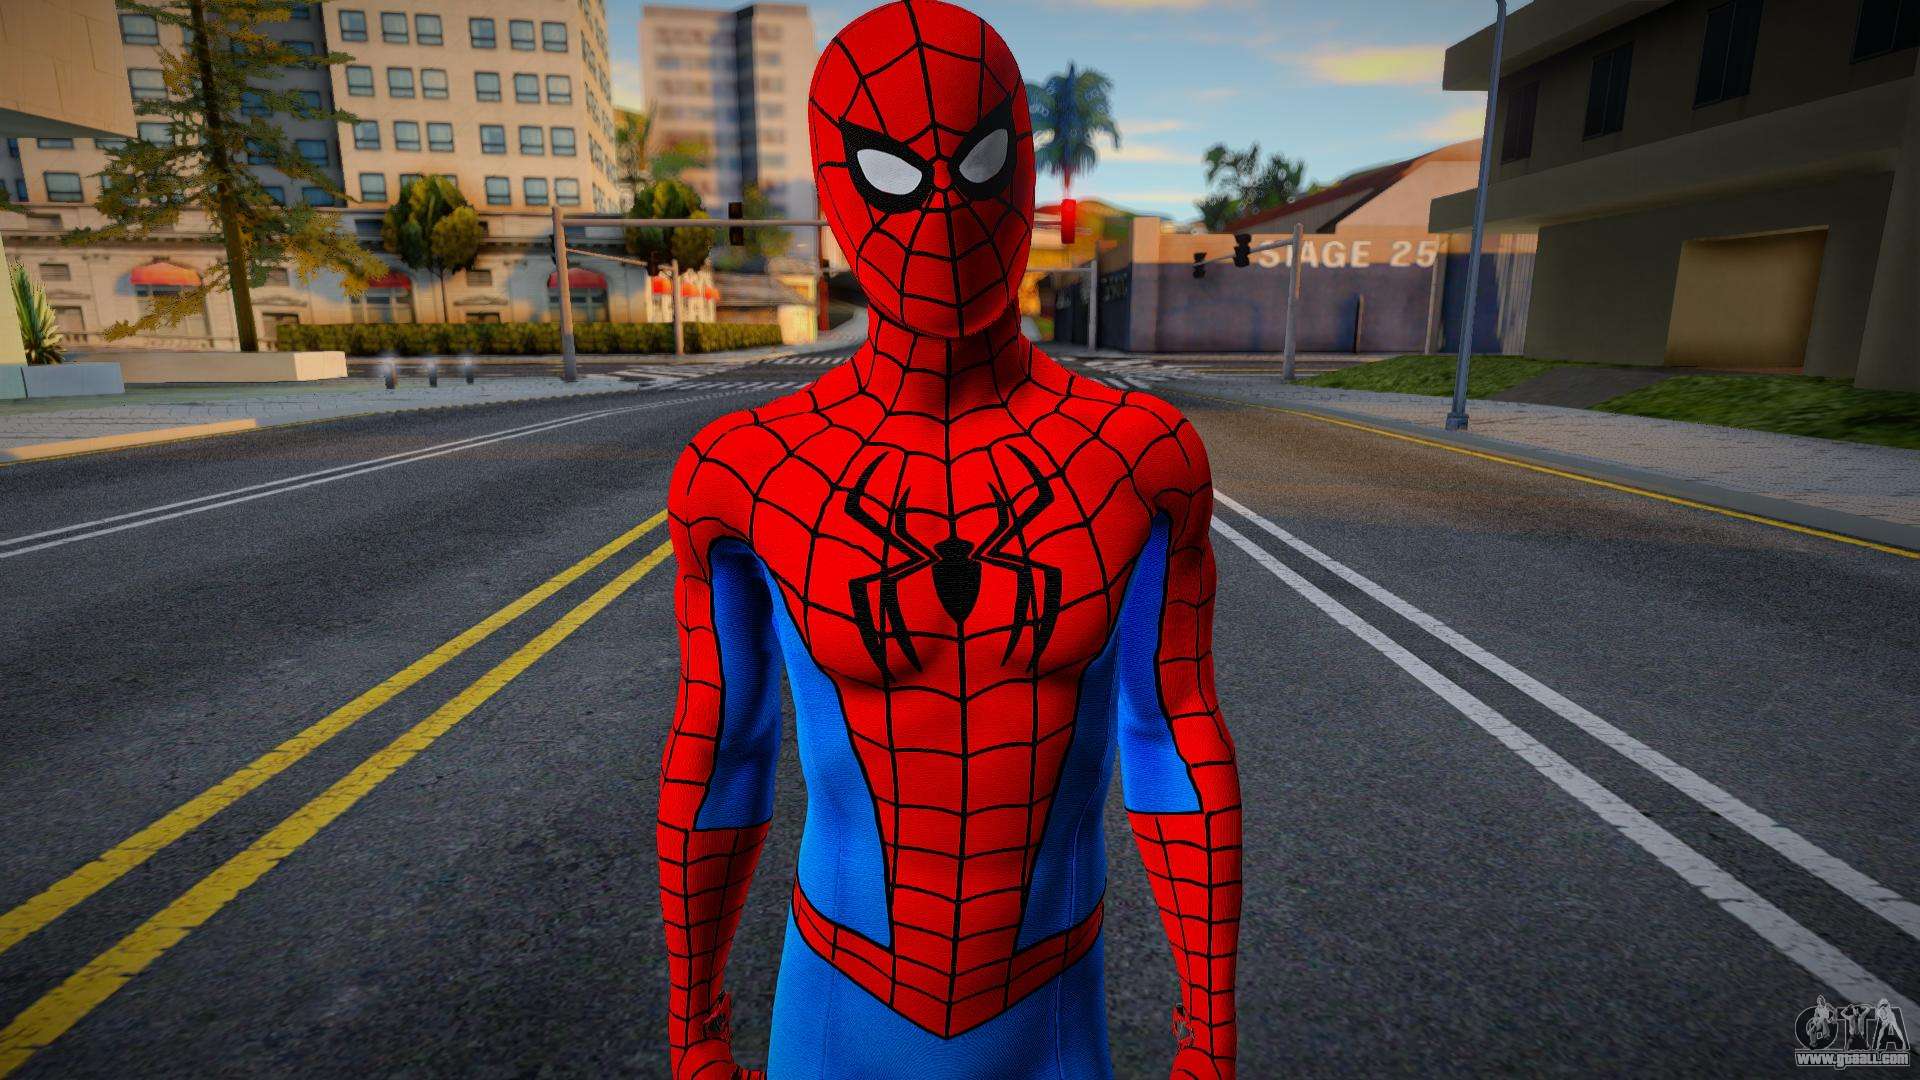 Spider-Man NWH Classic for GTA San Andreas